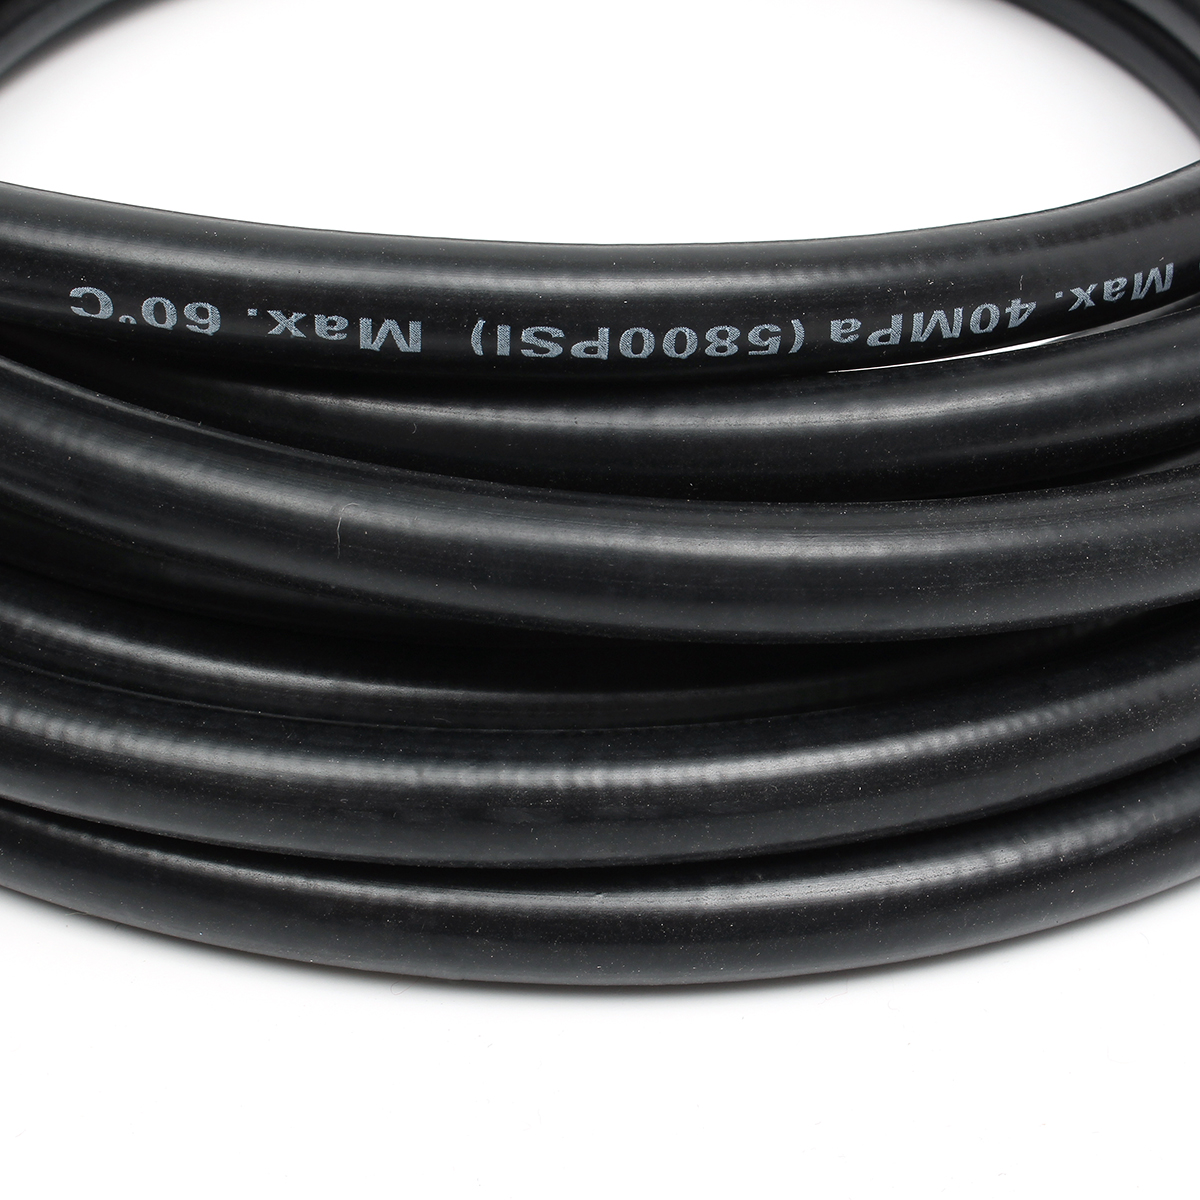 8M315-inch-2300PSI-Resin-Pipe-High-Pressure-Washer-Jet-Wash-Hose-M22-M14-14mm22mm-1434051-7